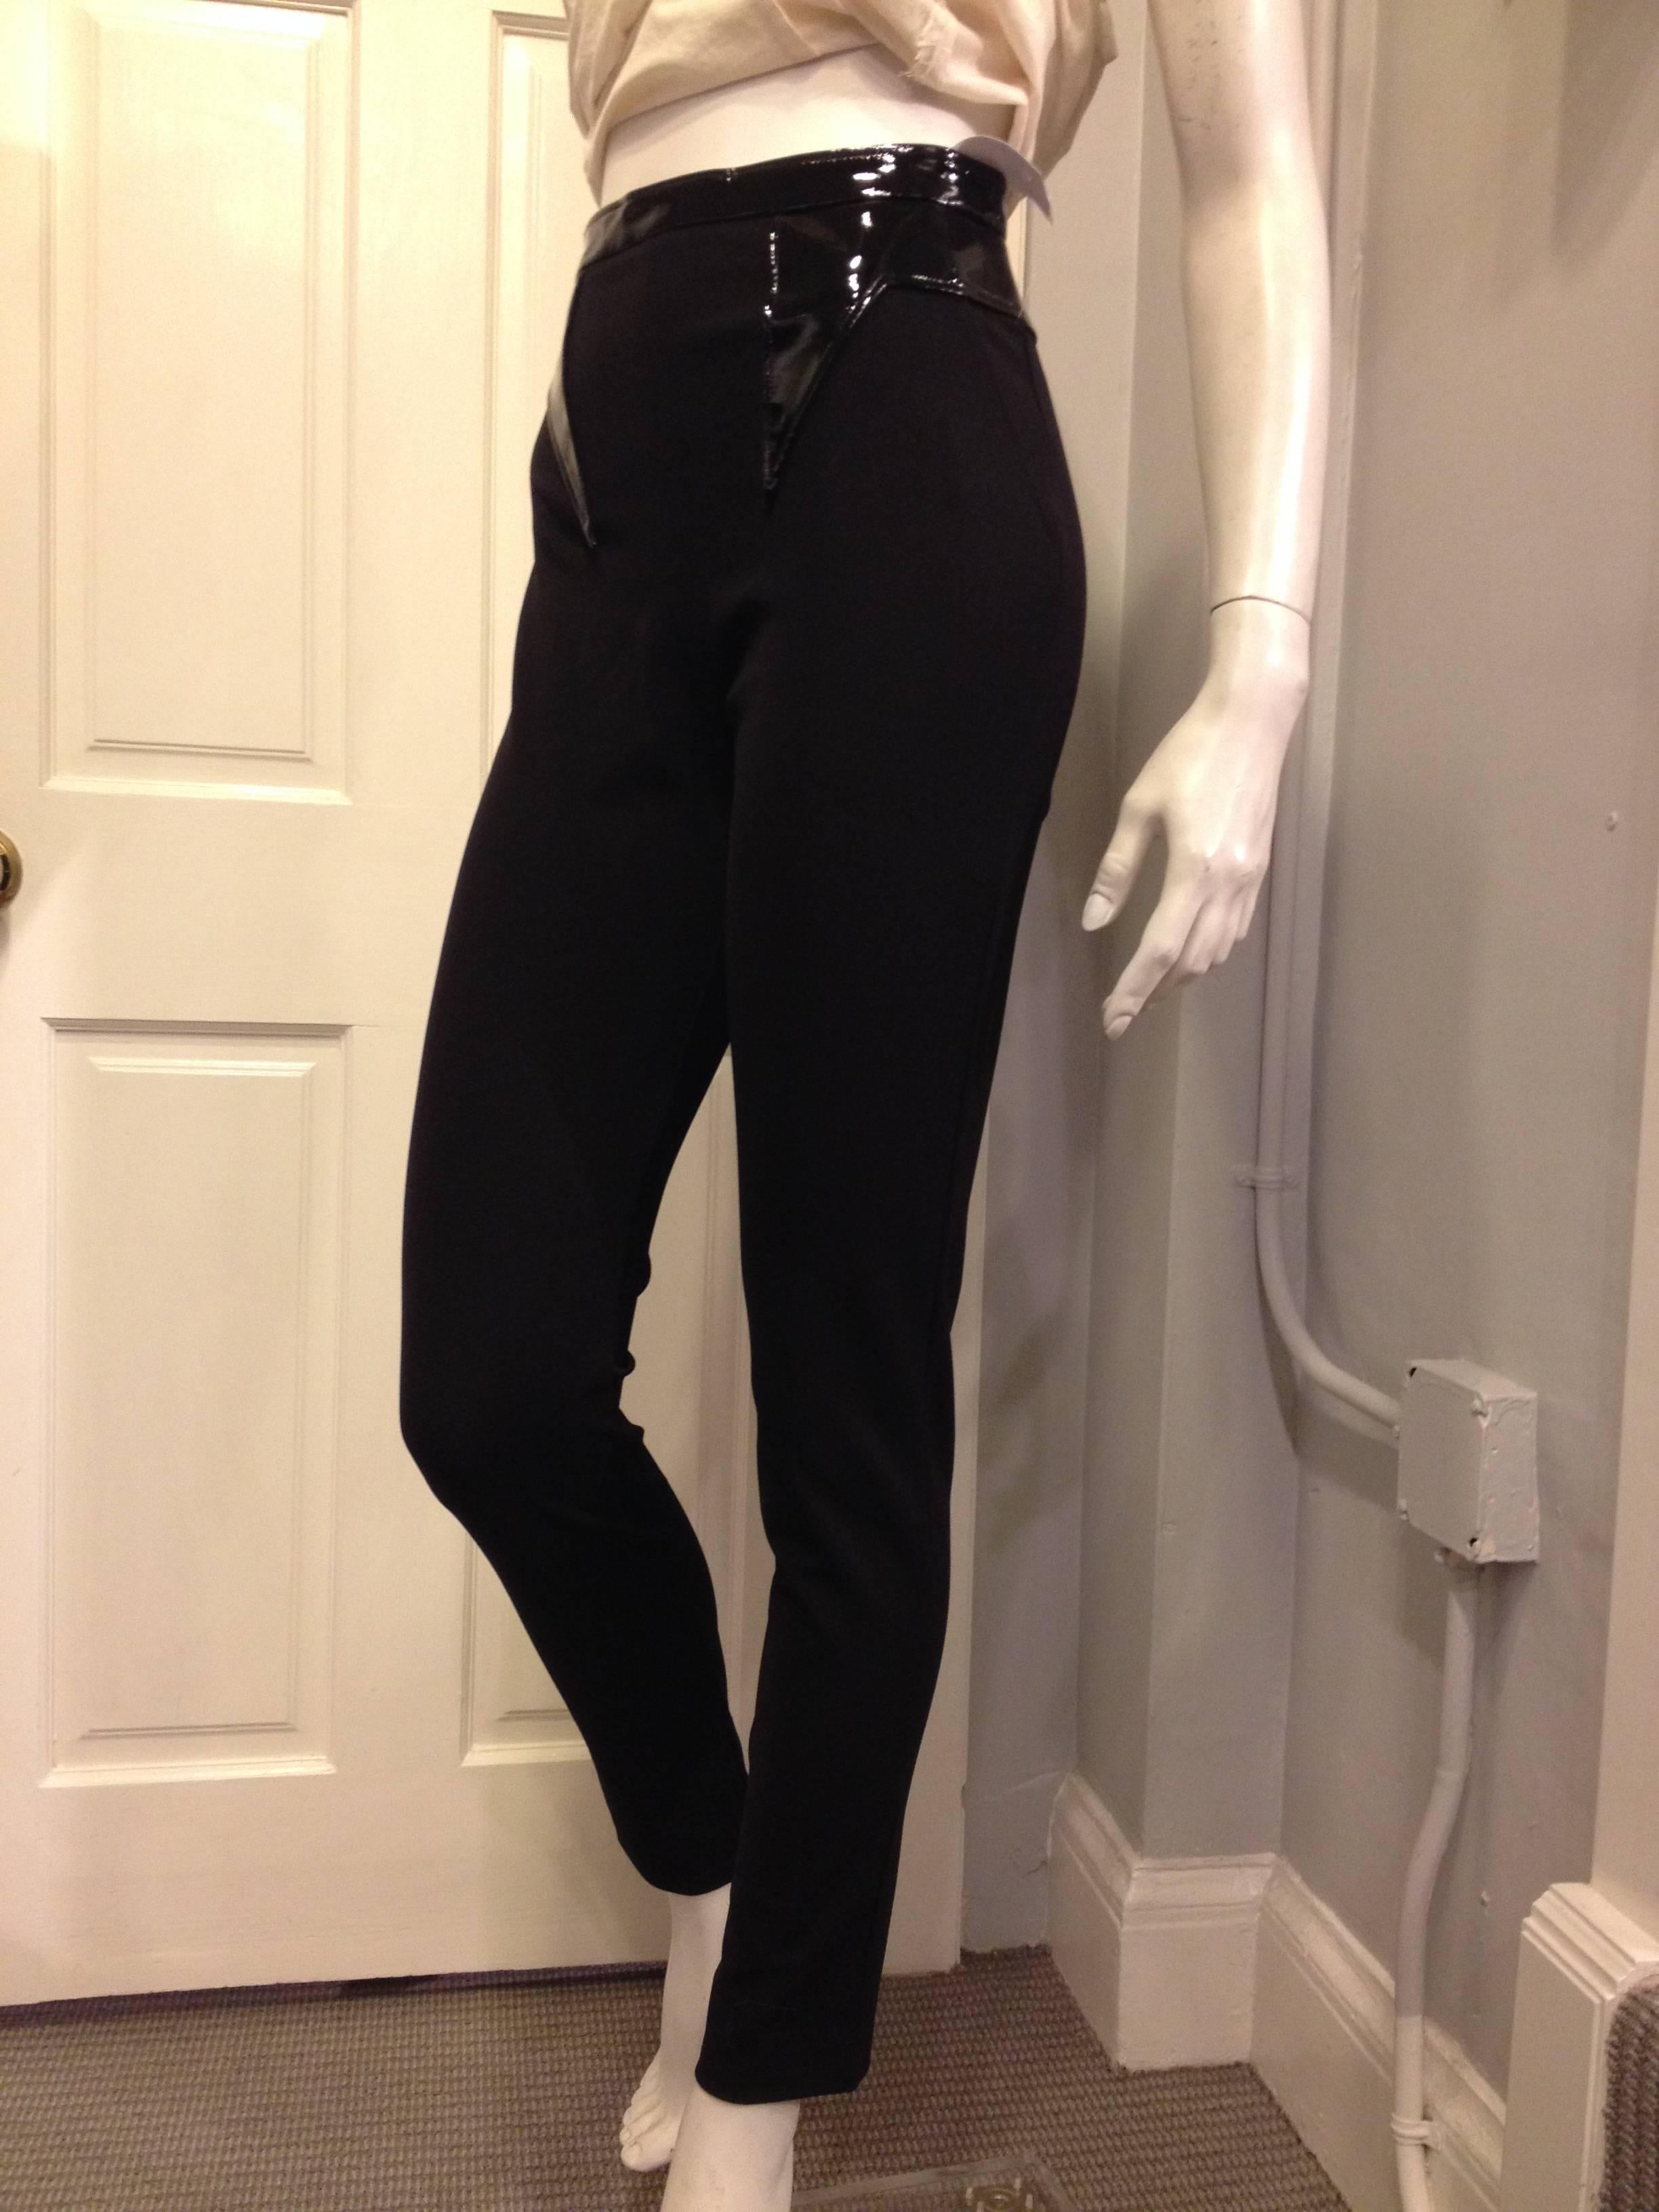 These pants are as comfortable as a legging but edgy and sleek enough to wear out at night - this is all one could really want. The material is a stretchy but substantial knit with a Givenchy style exposed zipper in the back, and is trimmed at the